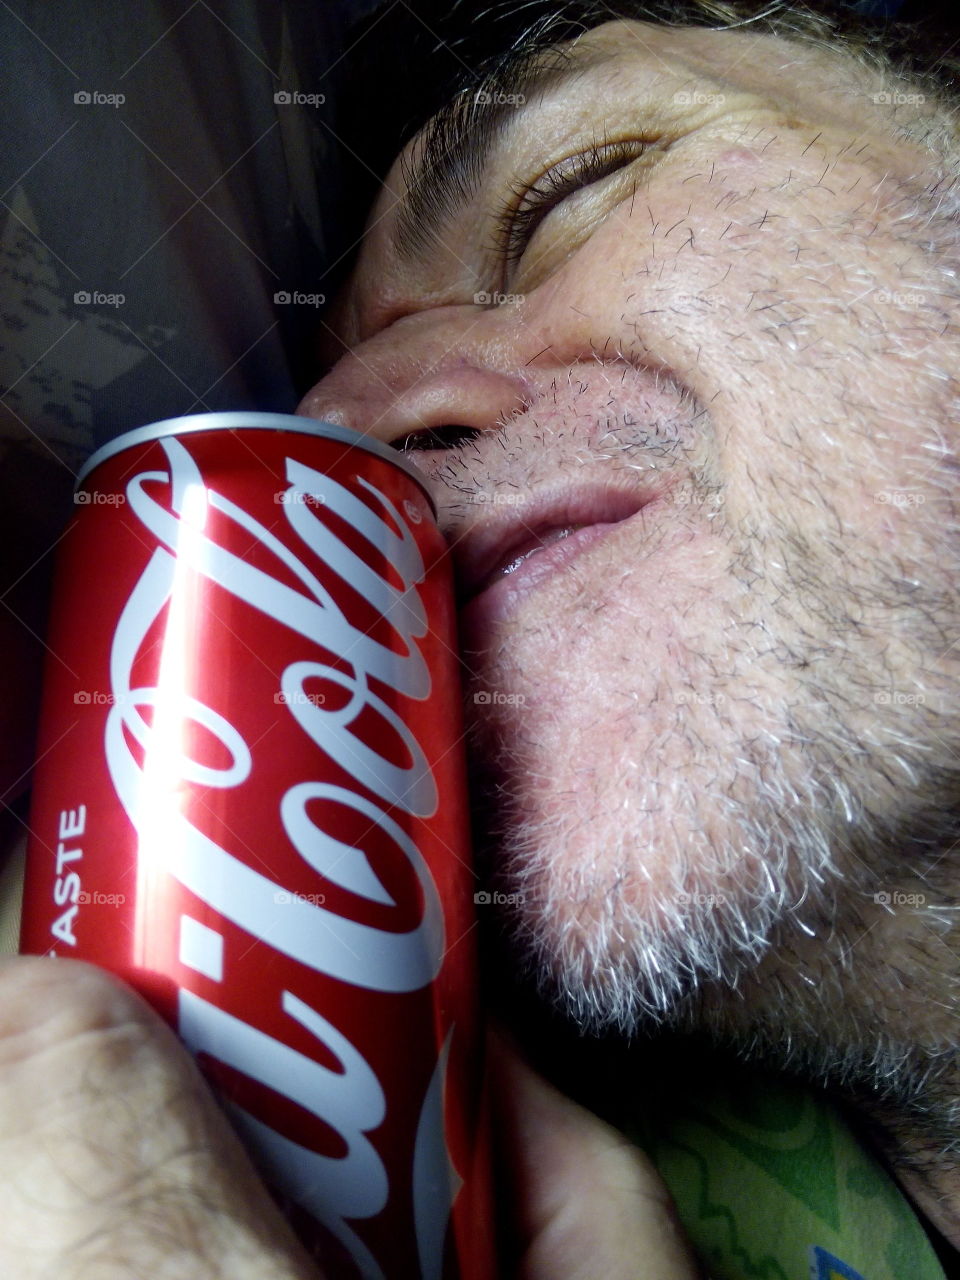 That moments of fun and laughter. Do it with  Coca cola. Taste that feeling.